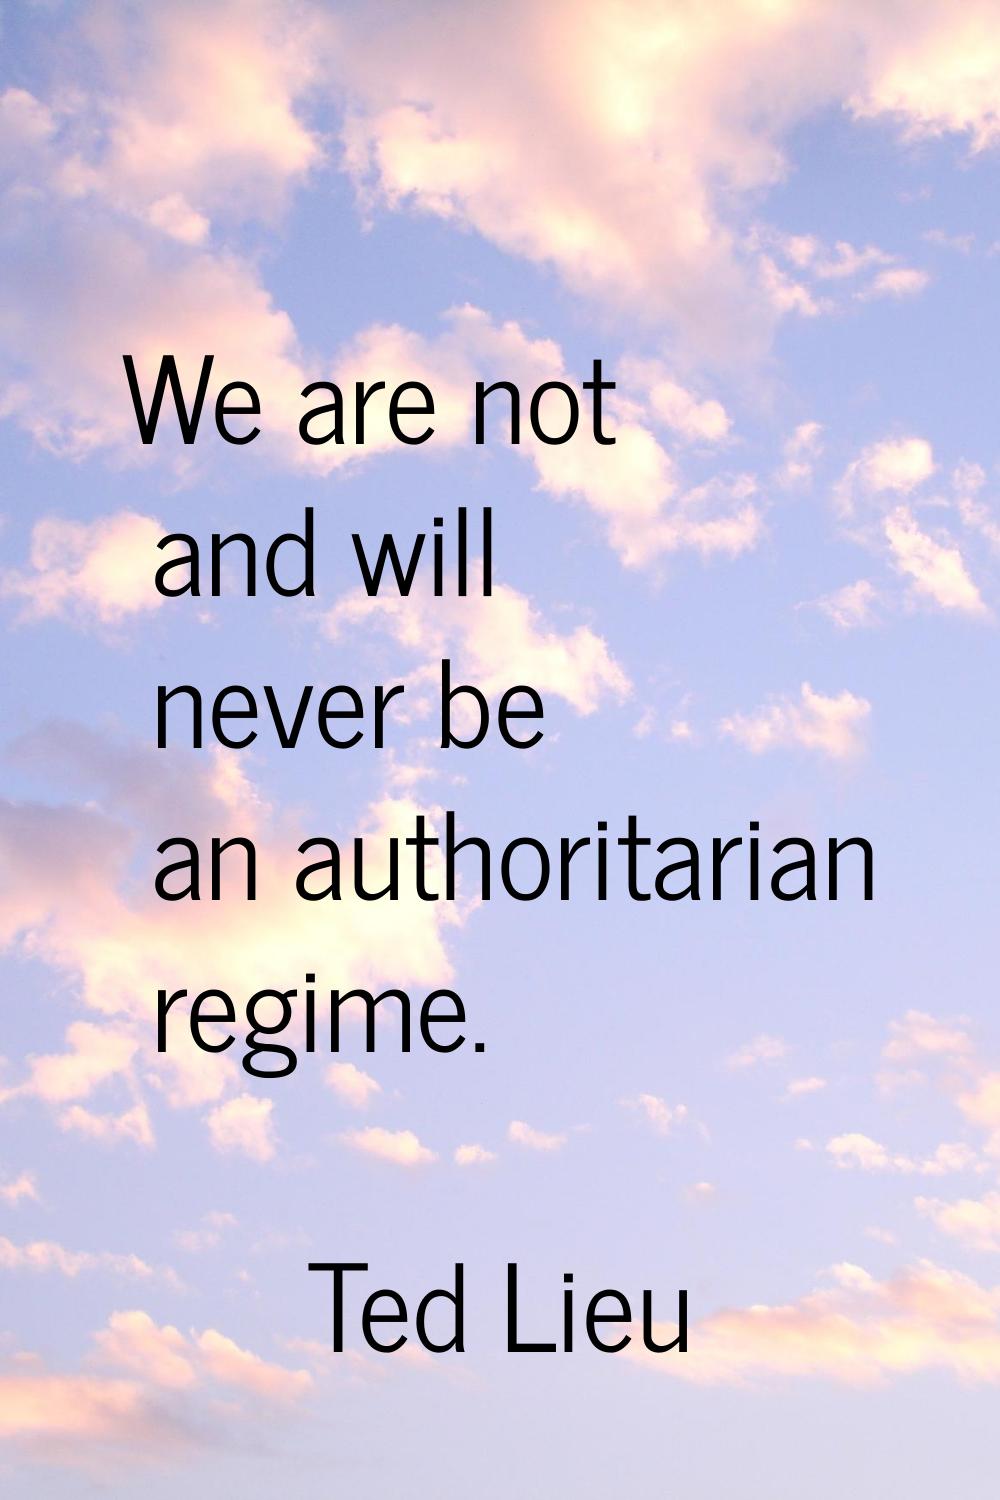 We are not and will never be an authoritarian regime.